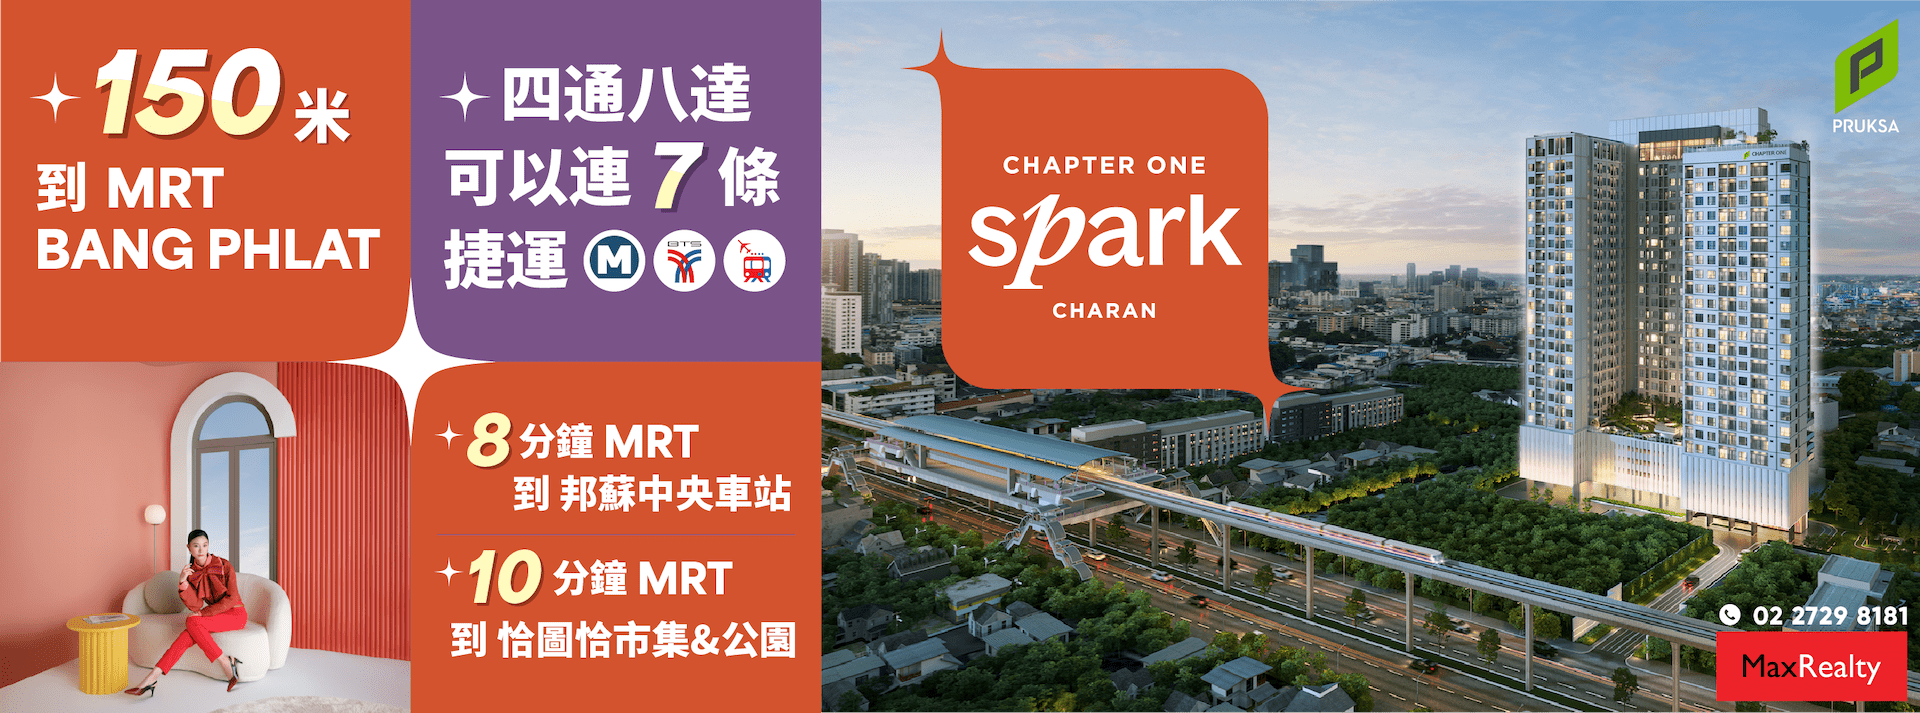 CHAPTER ONE SPARK CHARAN